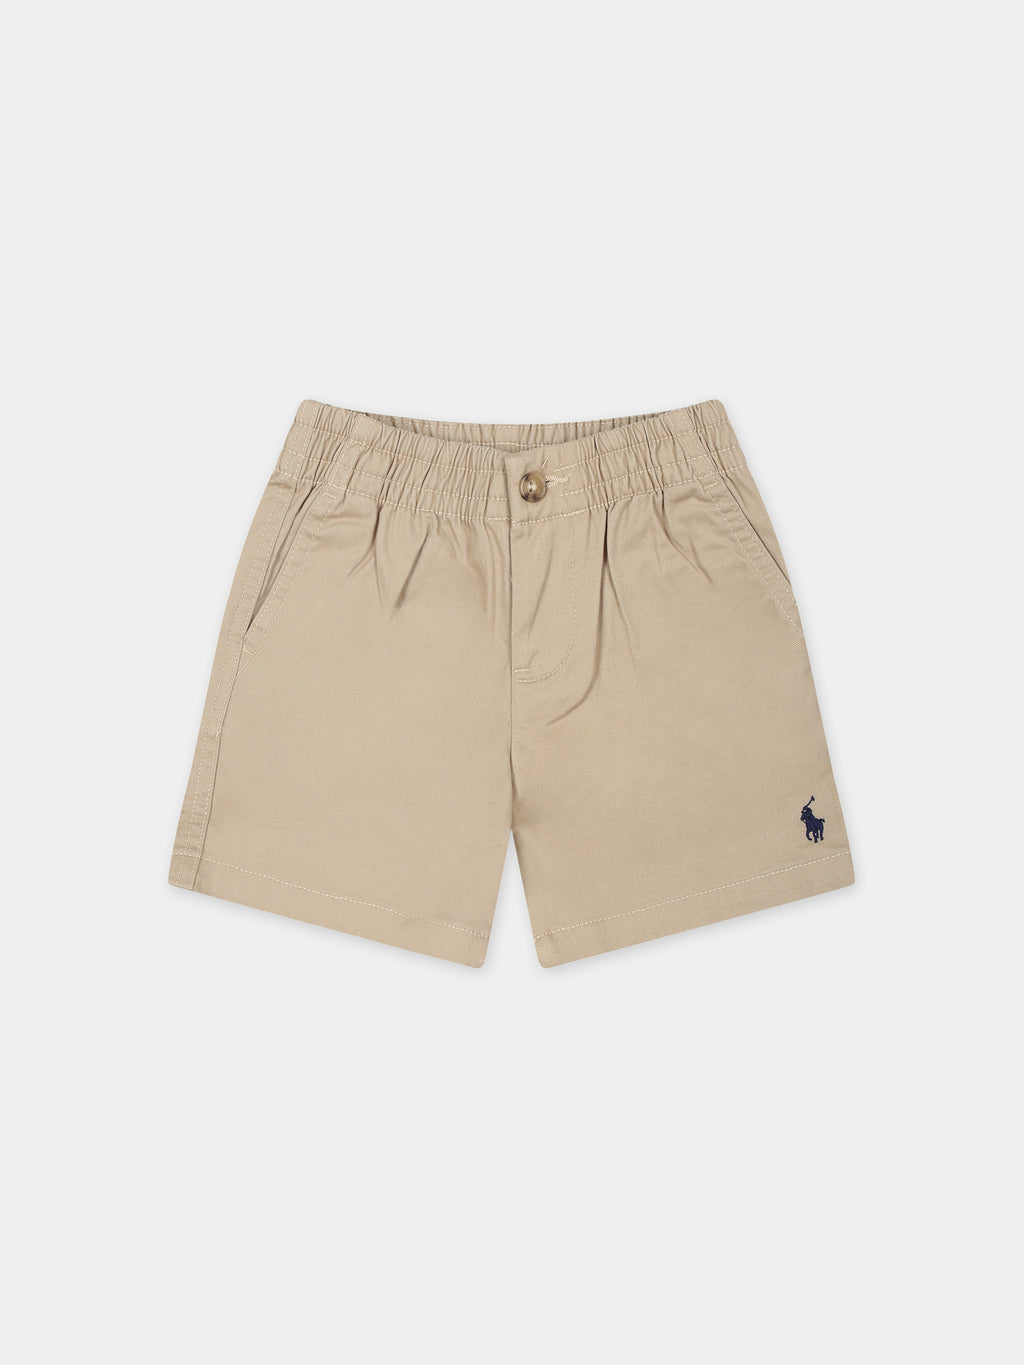 Beige shorts for baby boy with embroidery